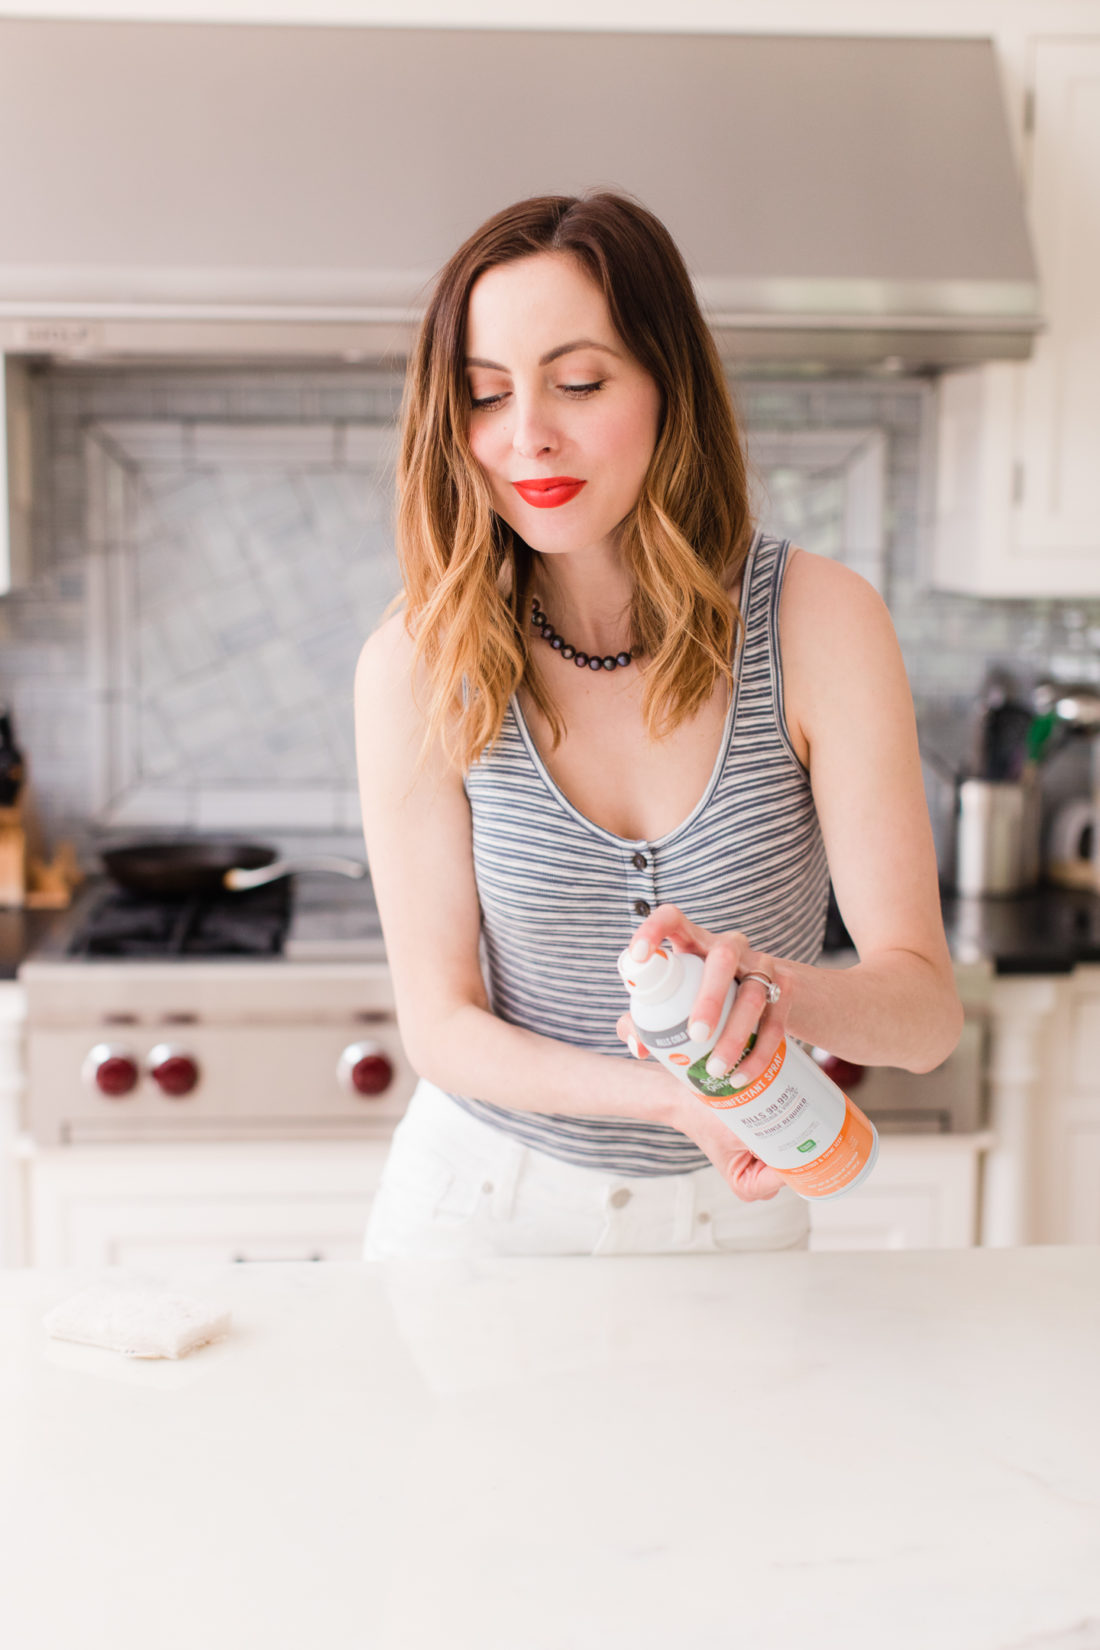 Eva Amurri Martino sprays the countertops with Seventh Generation disinfecting spray in the kitchen of her connecticut home